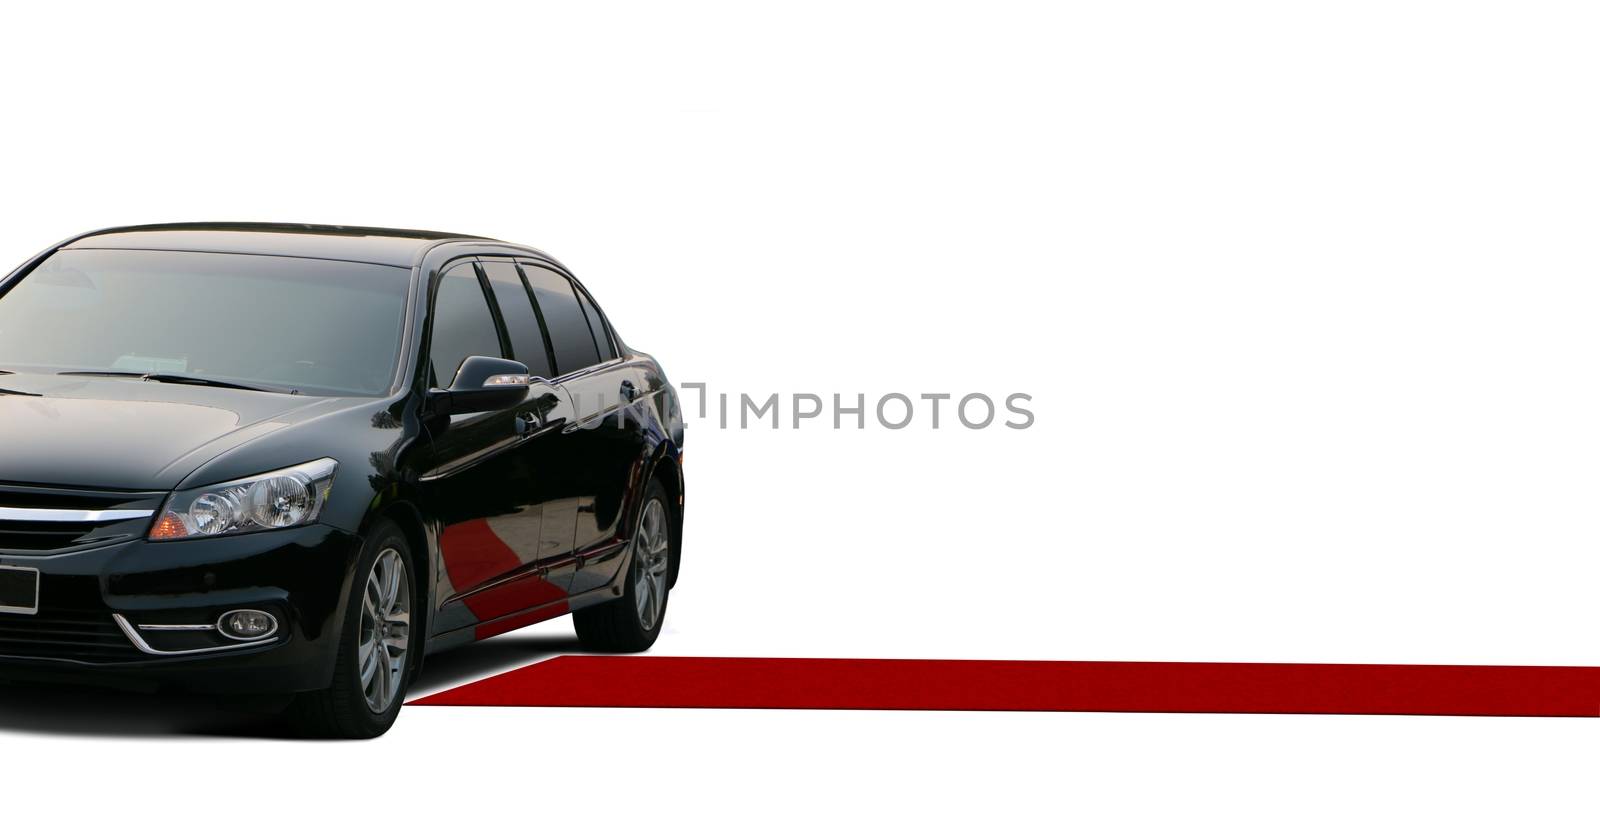 Red carpet and black limousine over white by razihusin